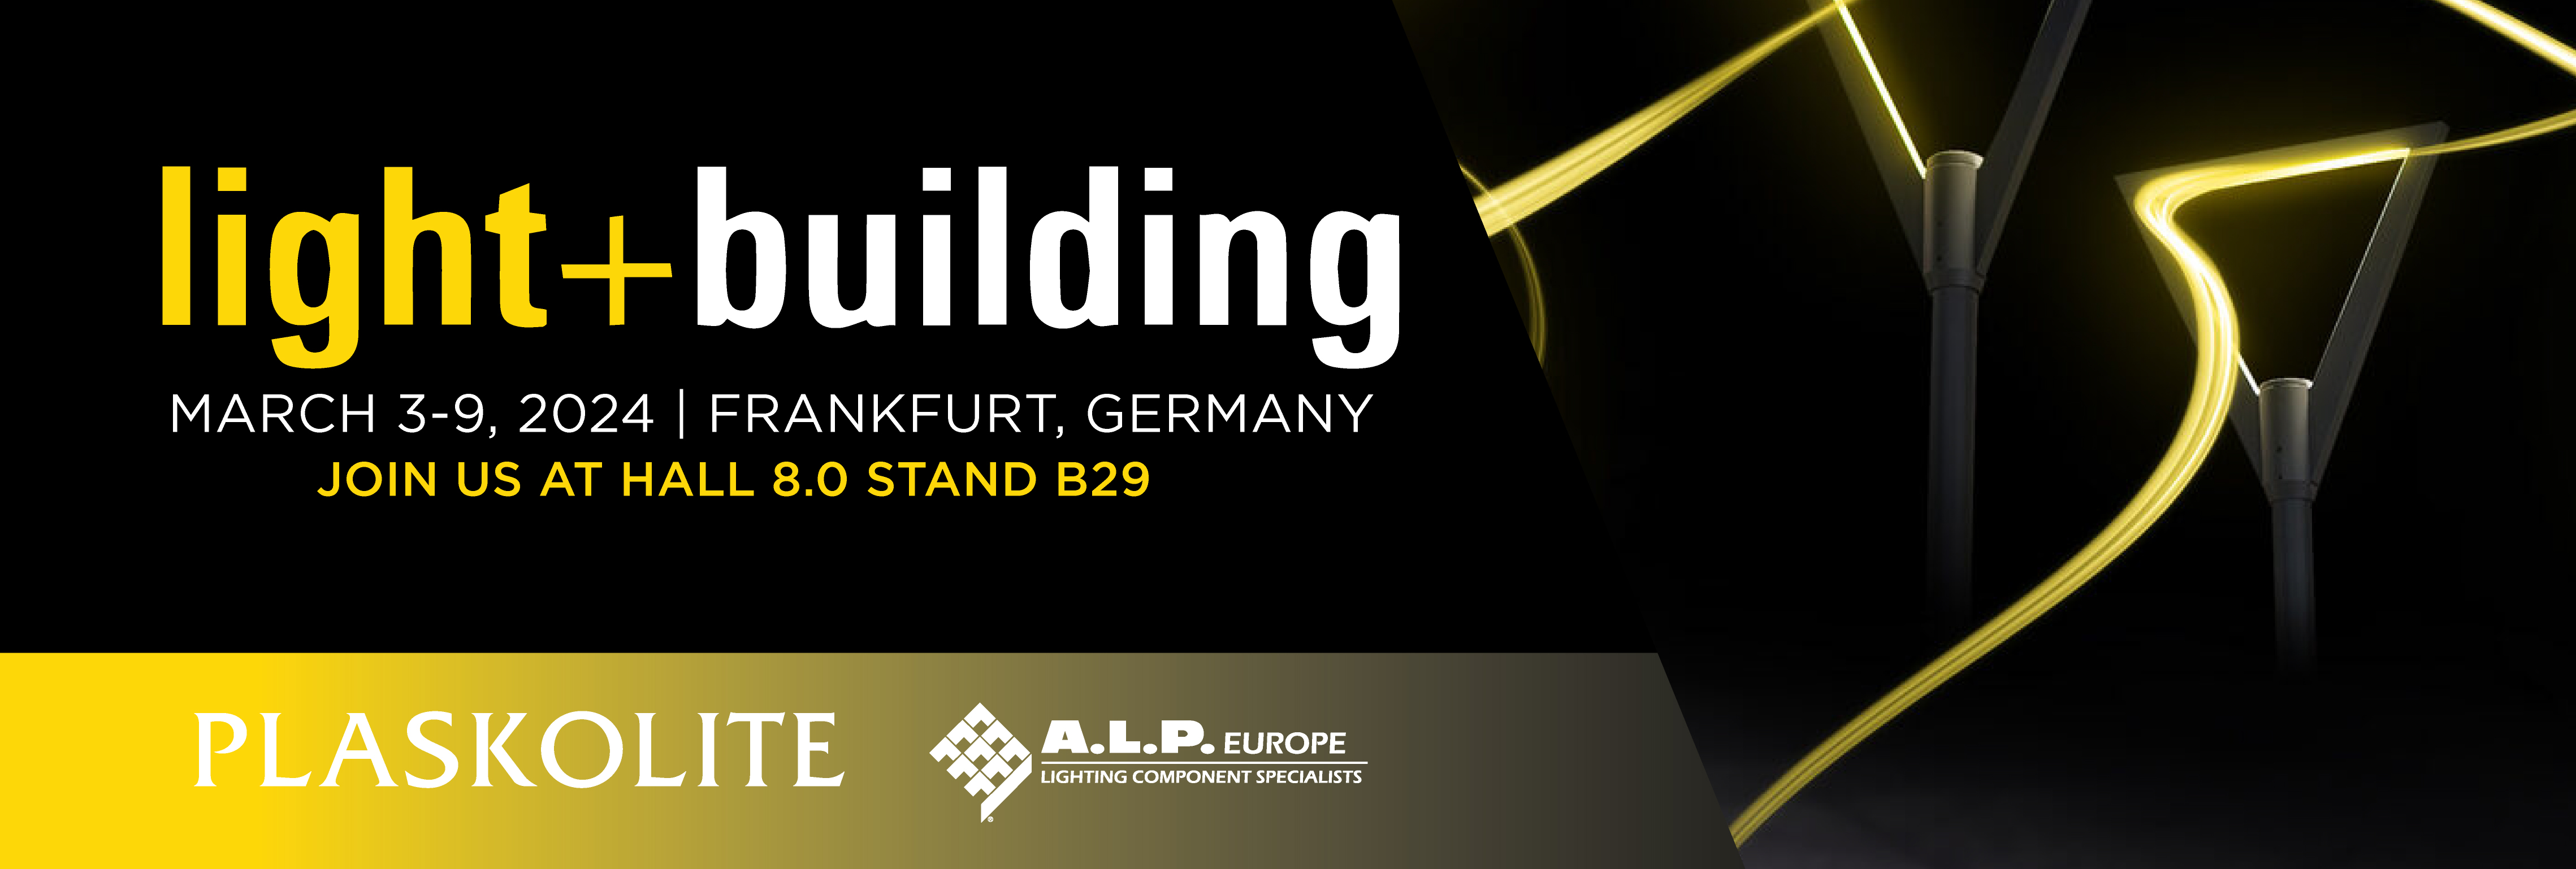 Join us at light+building, located in hall 8.0 stand B29